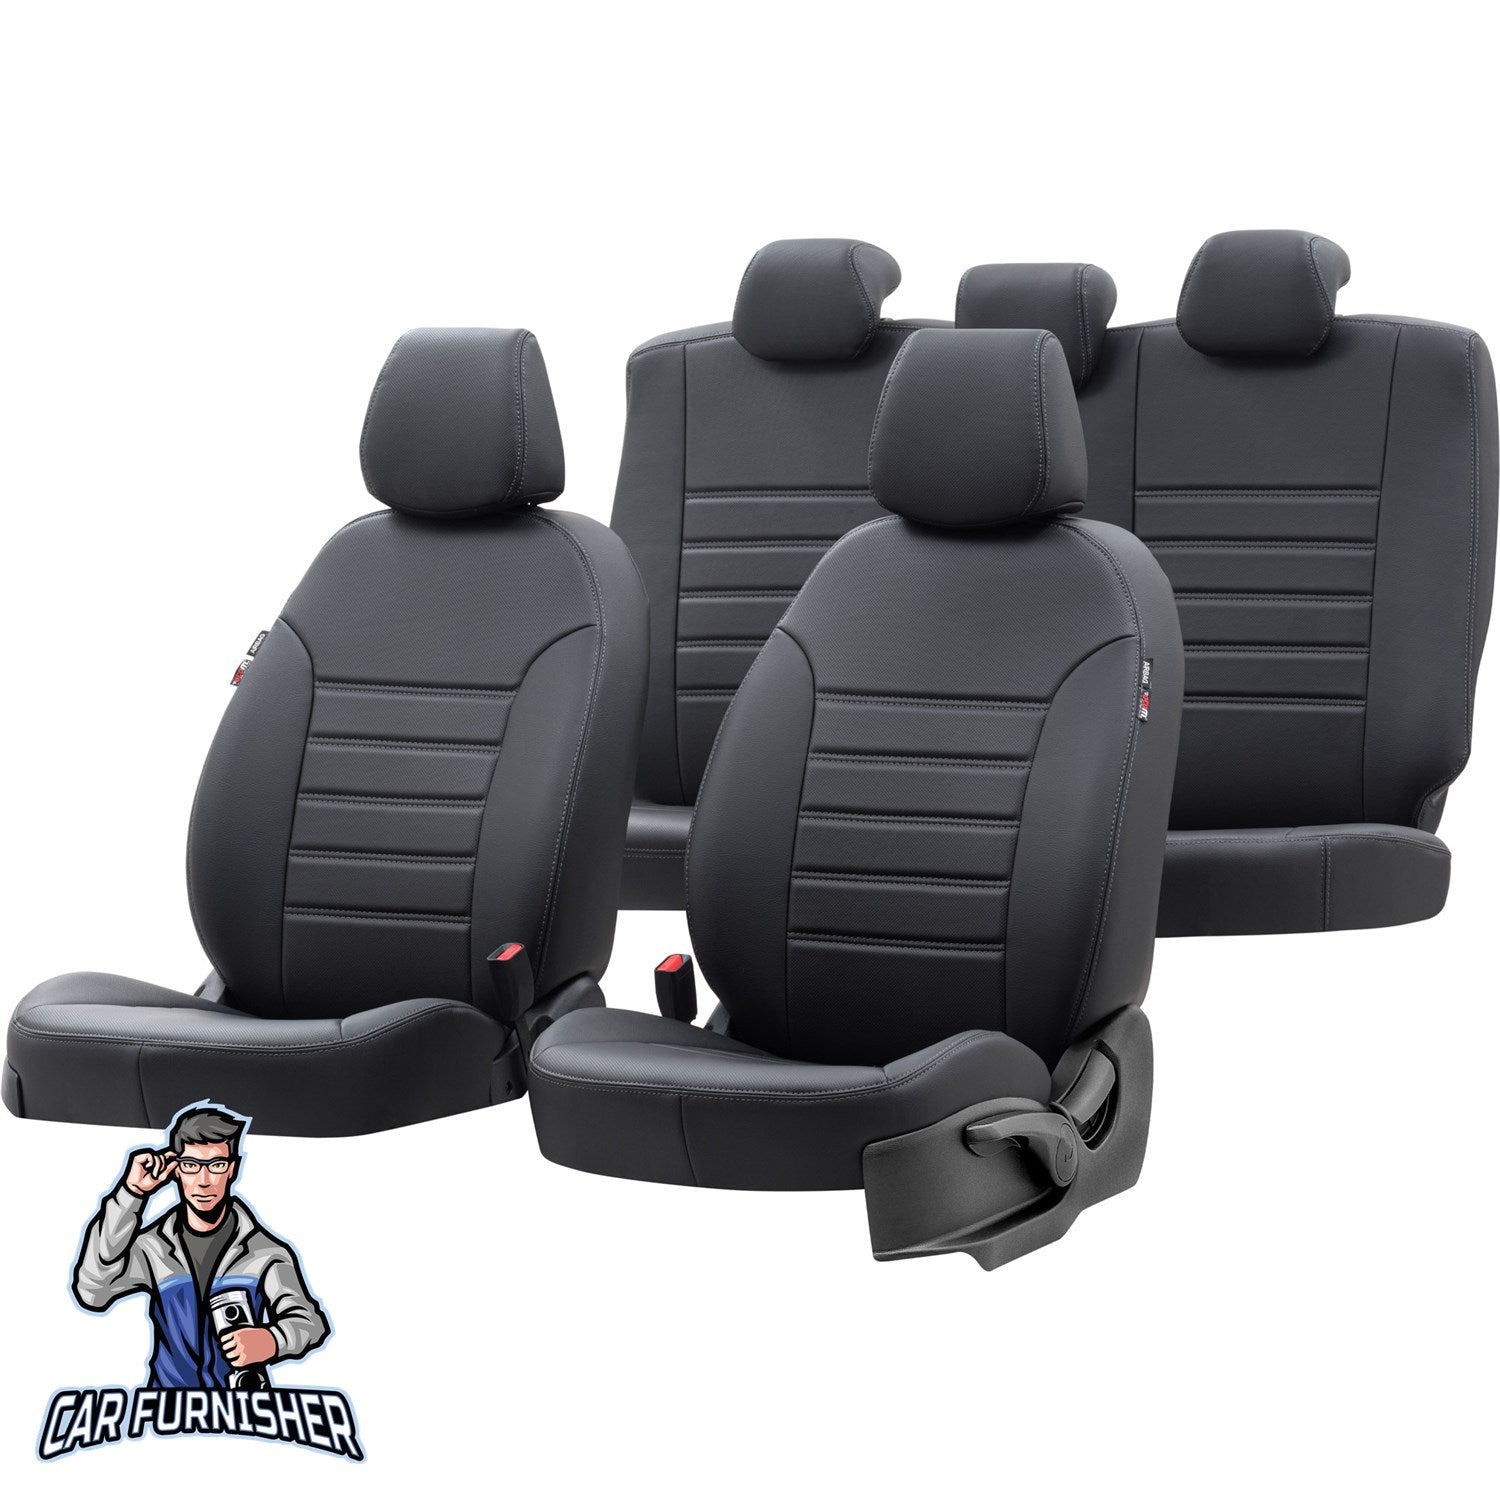 Volvo S60 Car Seat Cover 2000-2018 T4/T5/T6/T8/D5 Istanbul Design Black Full Set (5 Seats + Handrest) Leather & Fabric